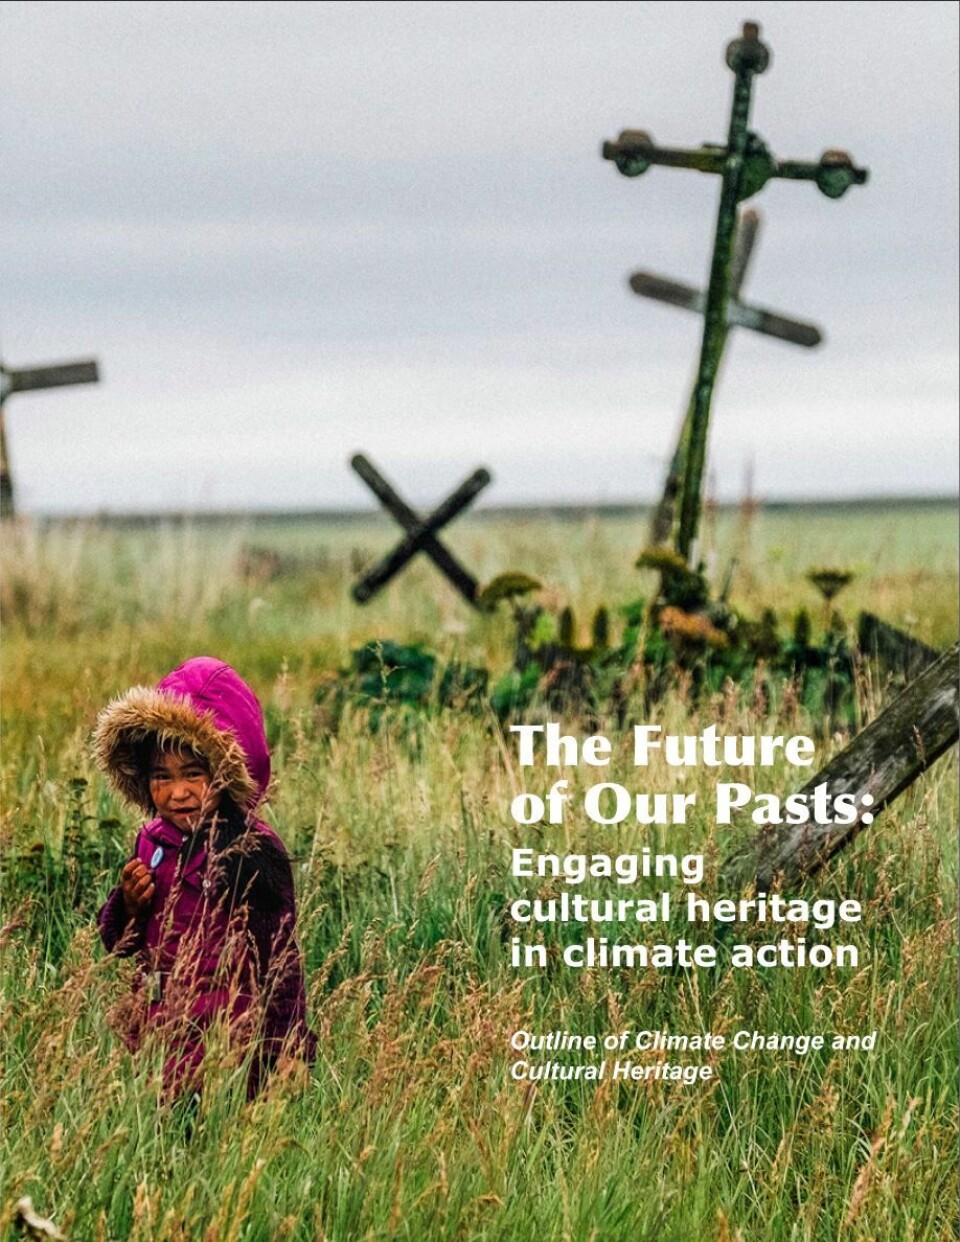 'The Future of Our Pasts: Engaging Cultural Heritage in Climate Action” report by ICOMOS.